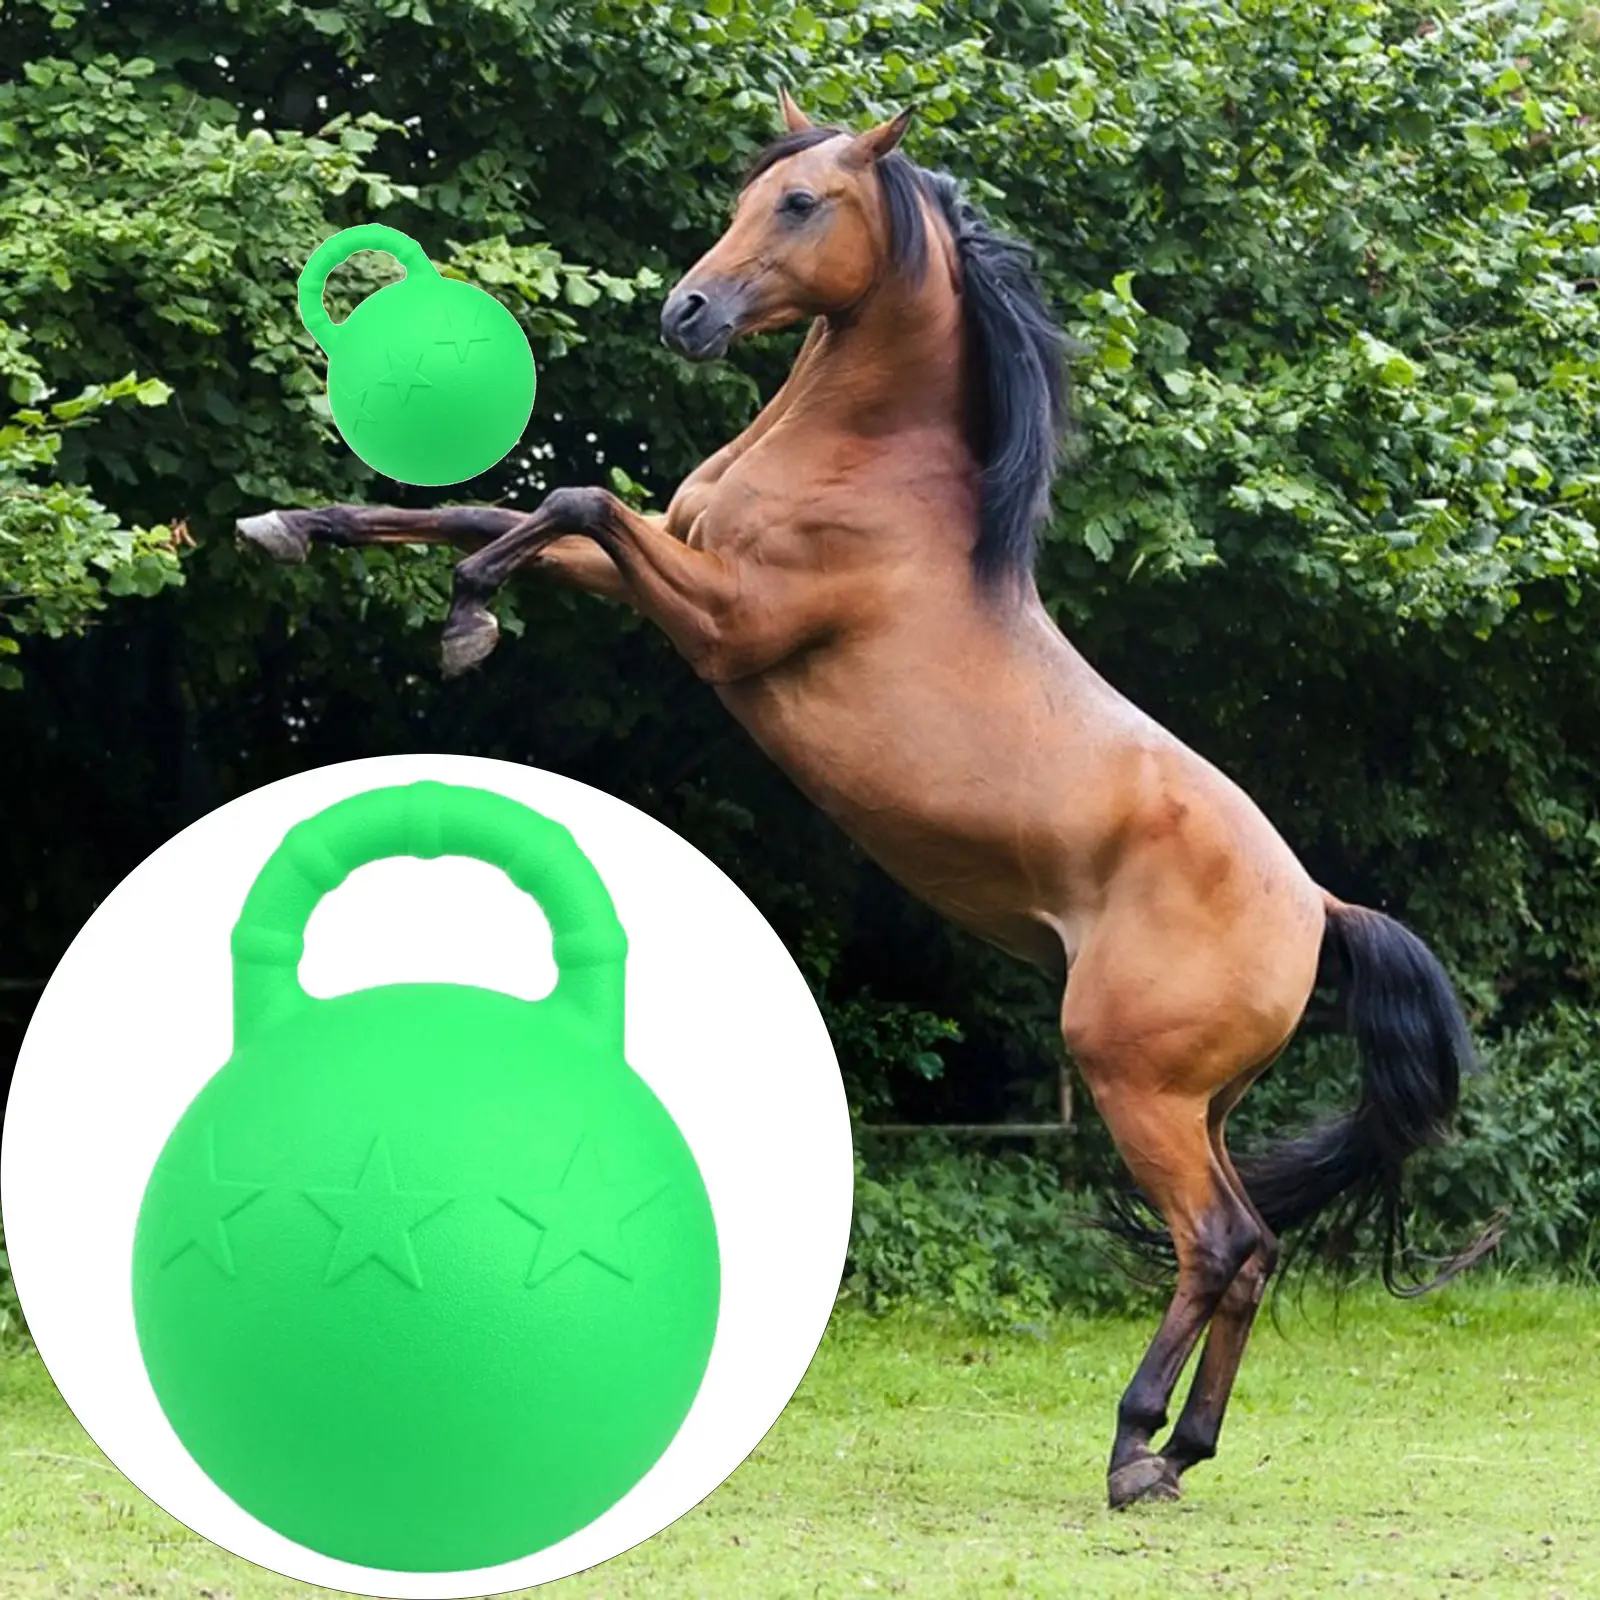 Equine Play Game Toy, Fruit Scented Anti-Burst Bounce Soccer Balls for Horse Large Dogs Juggling Playing Toys